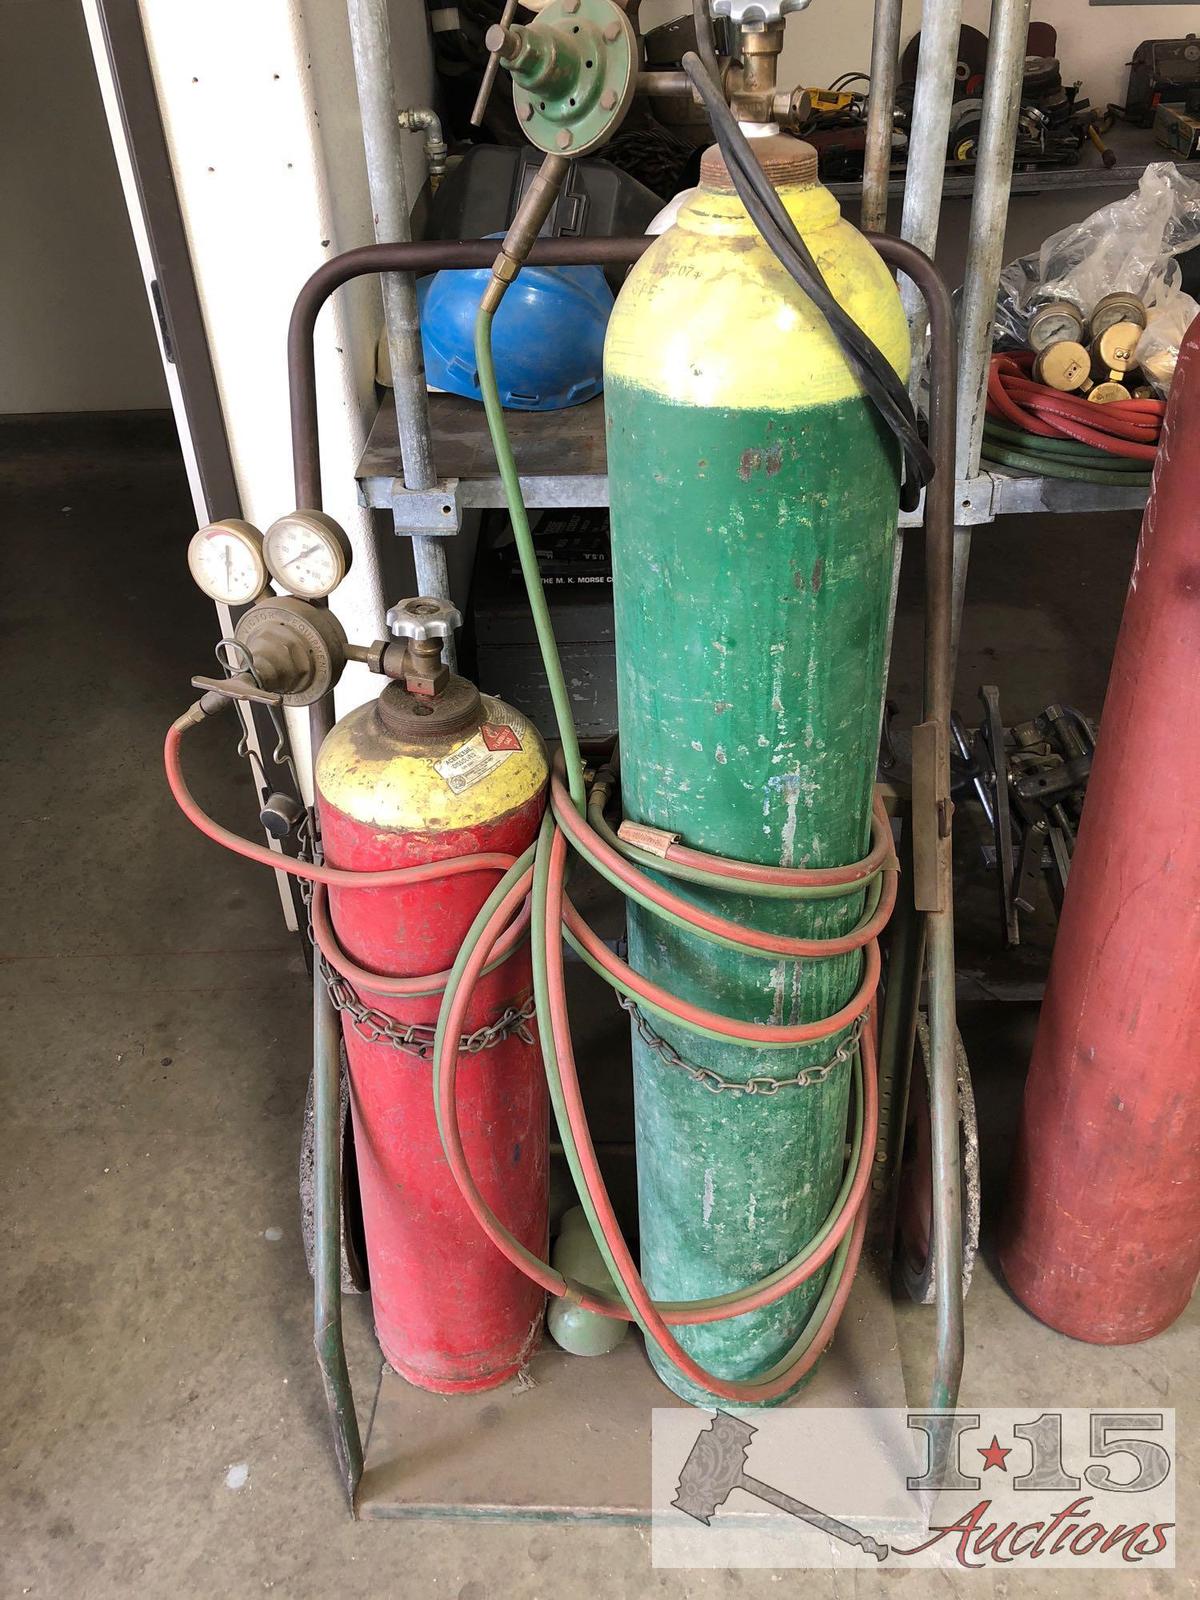 Acetylene Tank and Oxygen Tank with Dolly